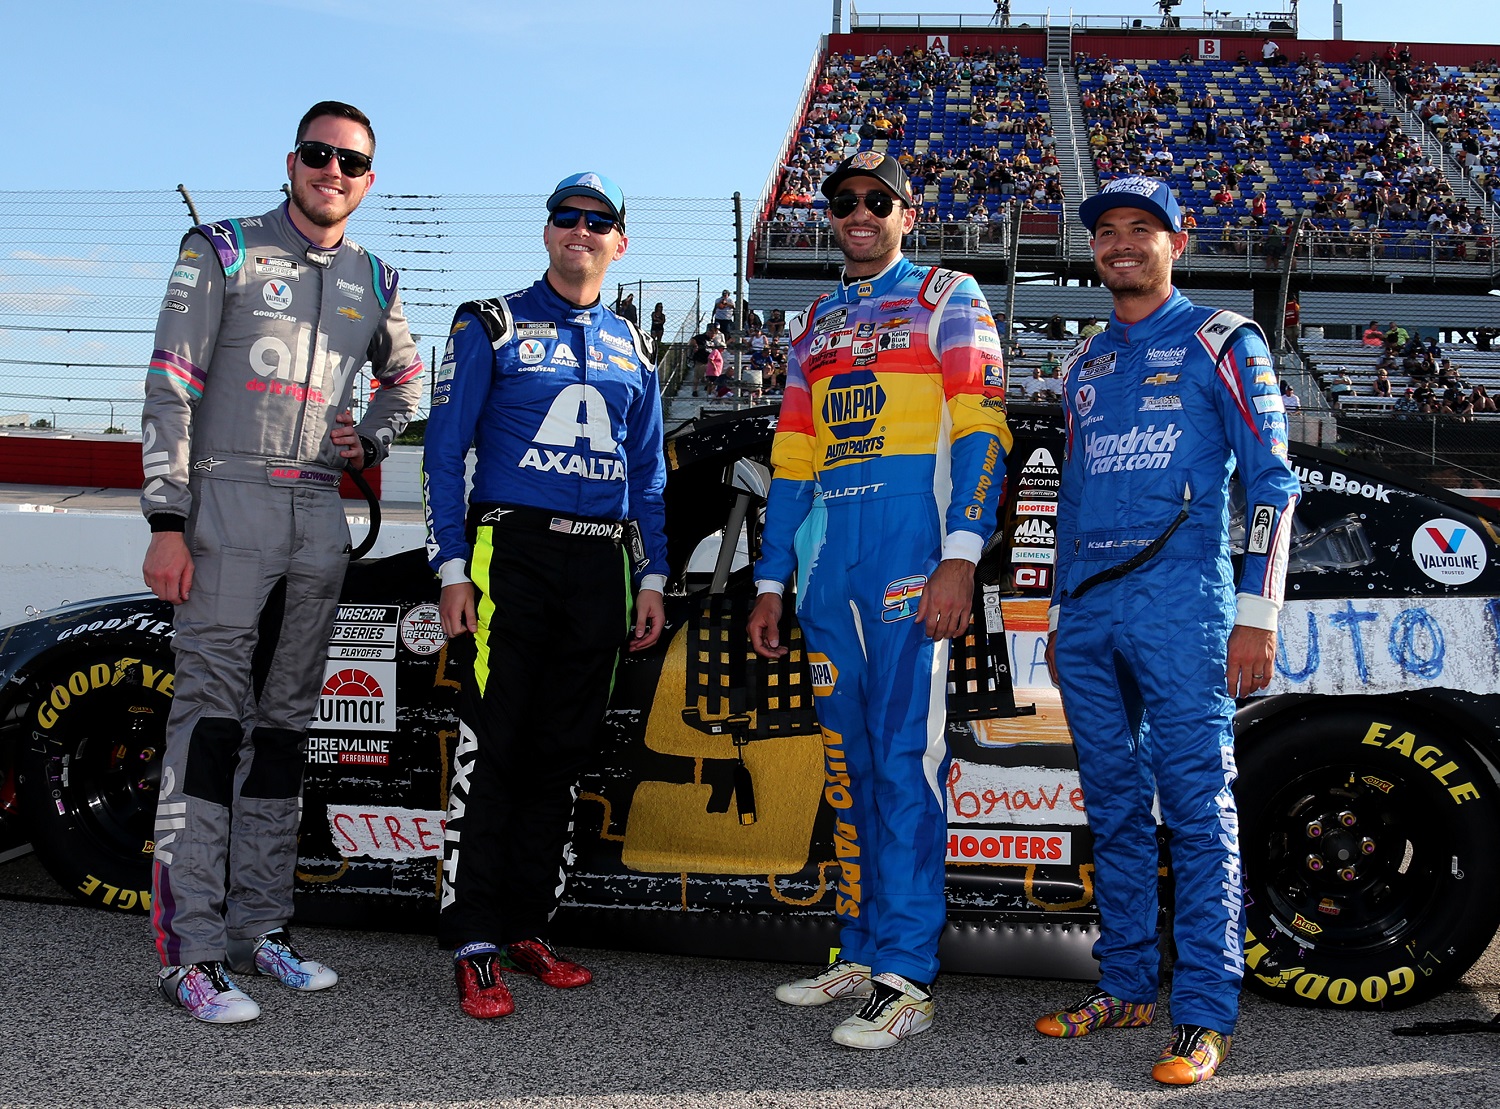 Alex Bowman, , William Byron, , Chase Elliott, and Kyle Larson of Hendrick Motorsports get together during the running of the NASCAR Cup Series Cook Out Southern 500 on Sept. 5, 2021, at Darlington Raceway. | Jeff Robinson/Icon Sportswire via Getty Images